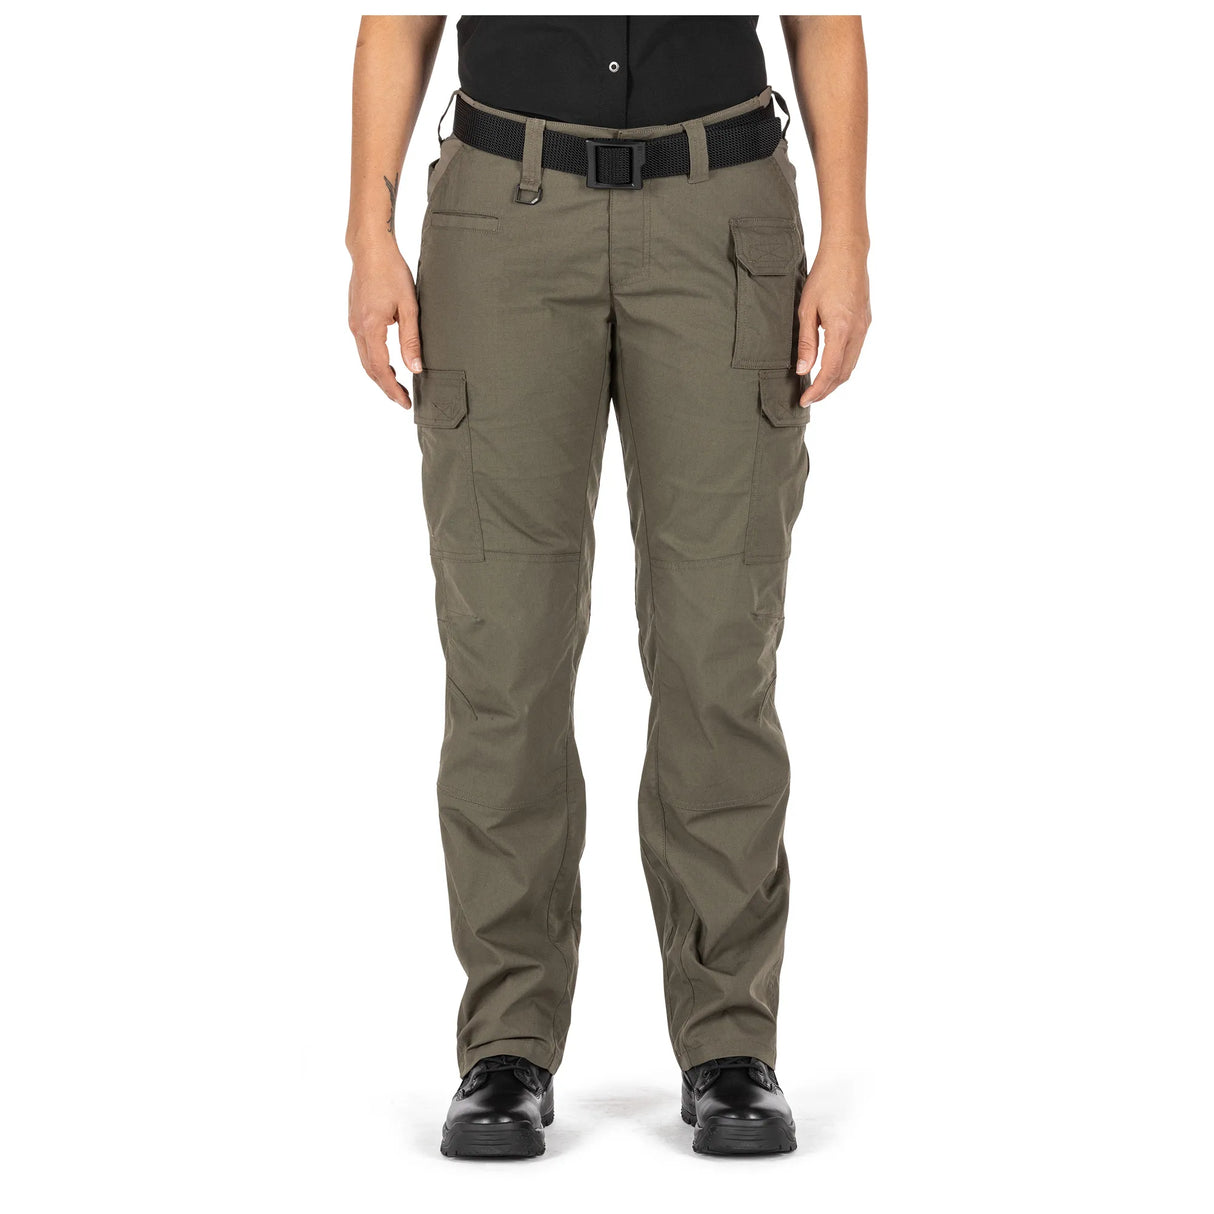 Resilient Ripstop Pants: Built to withstand the rigors of daily wear.